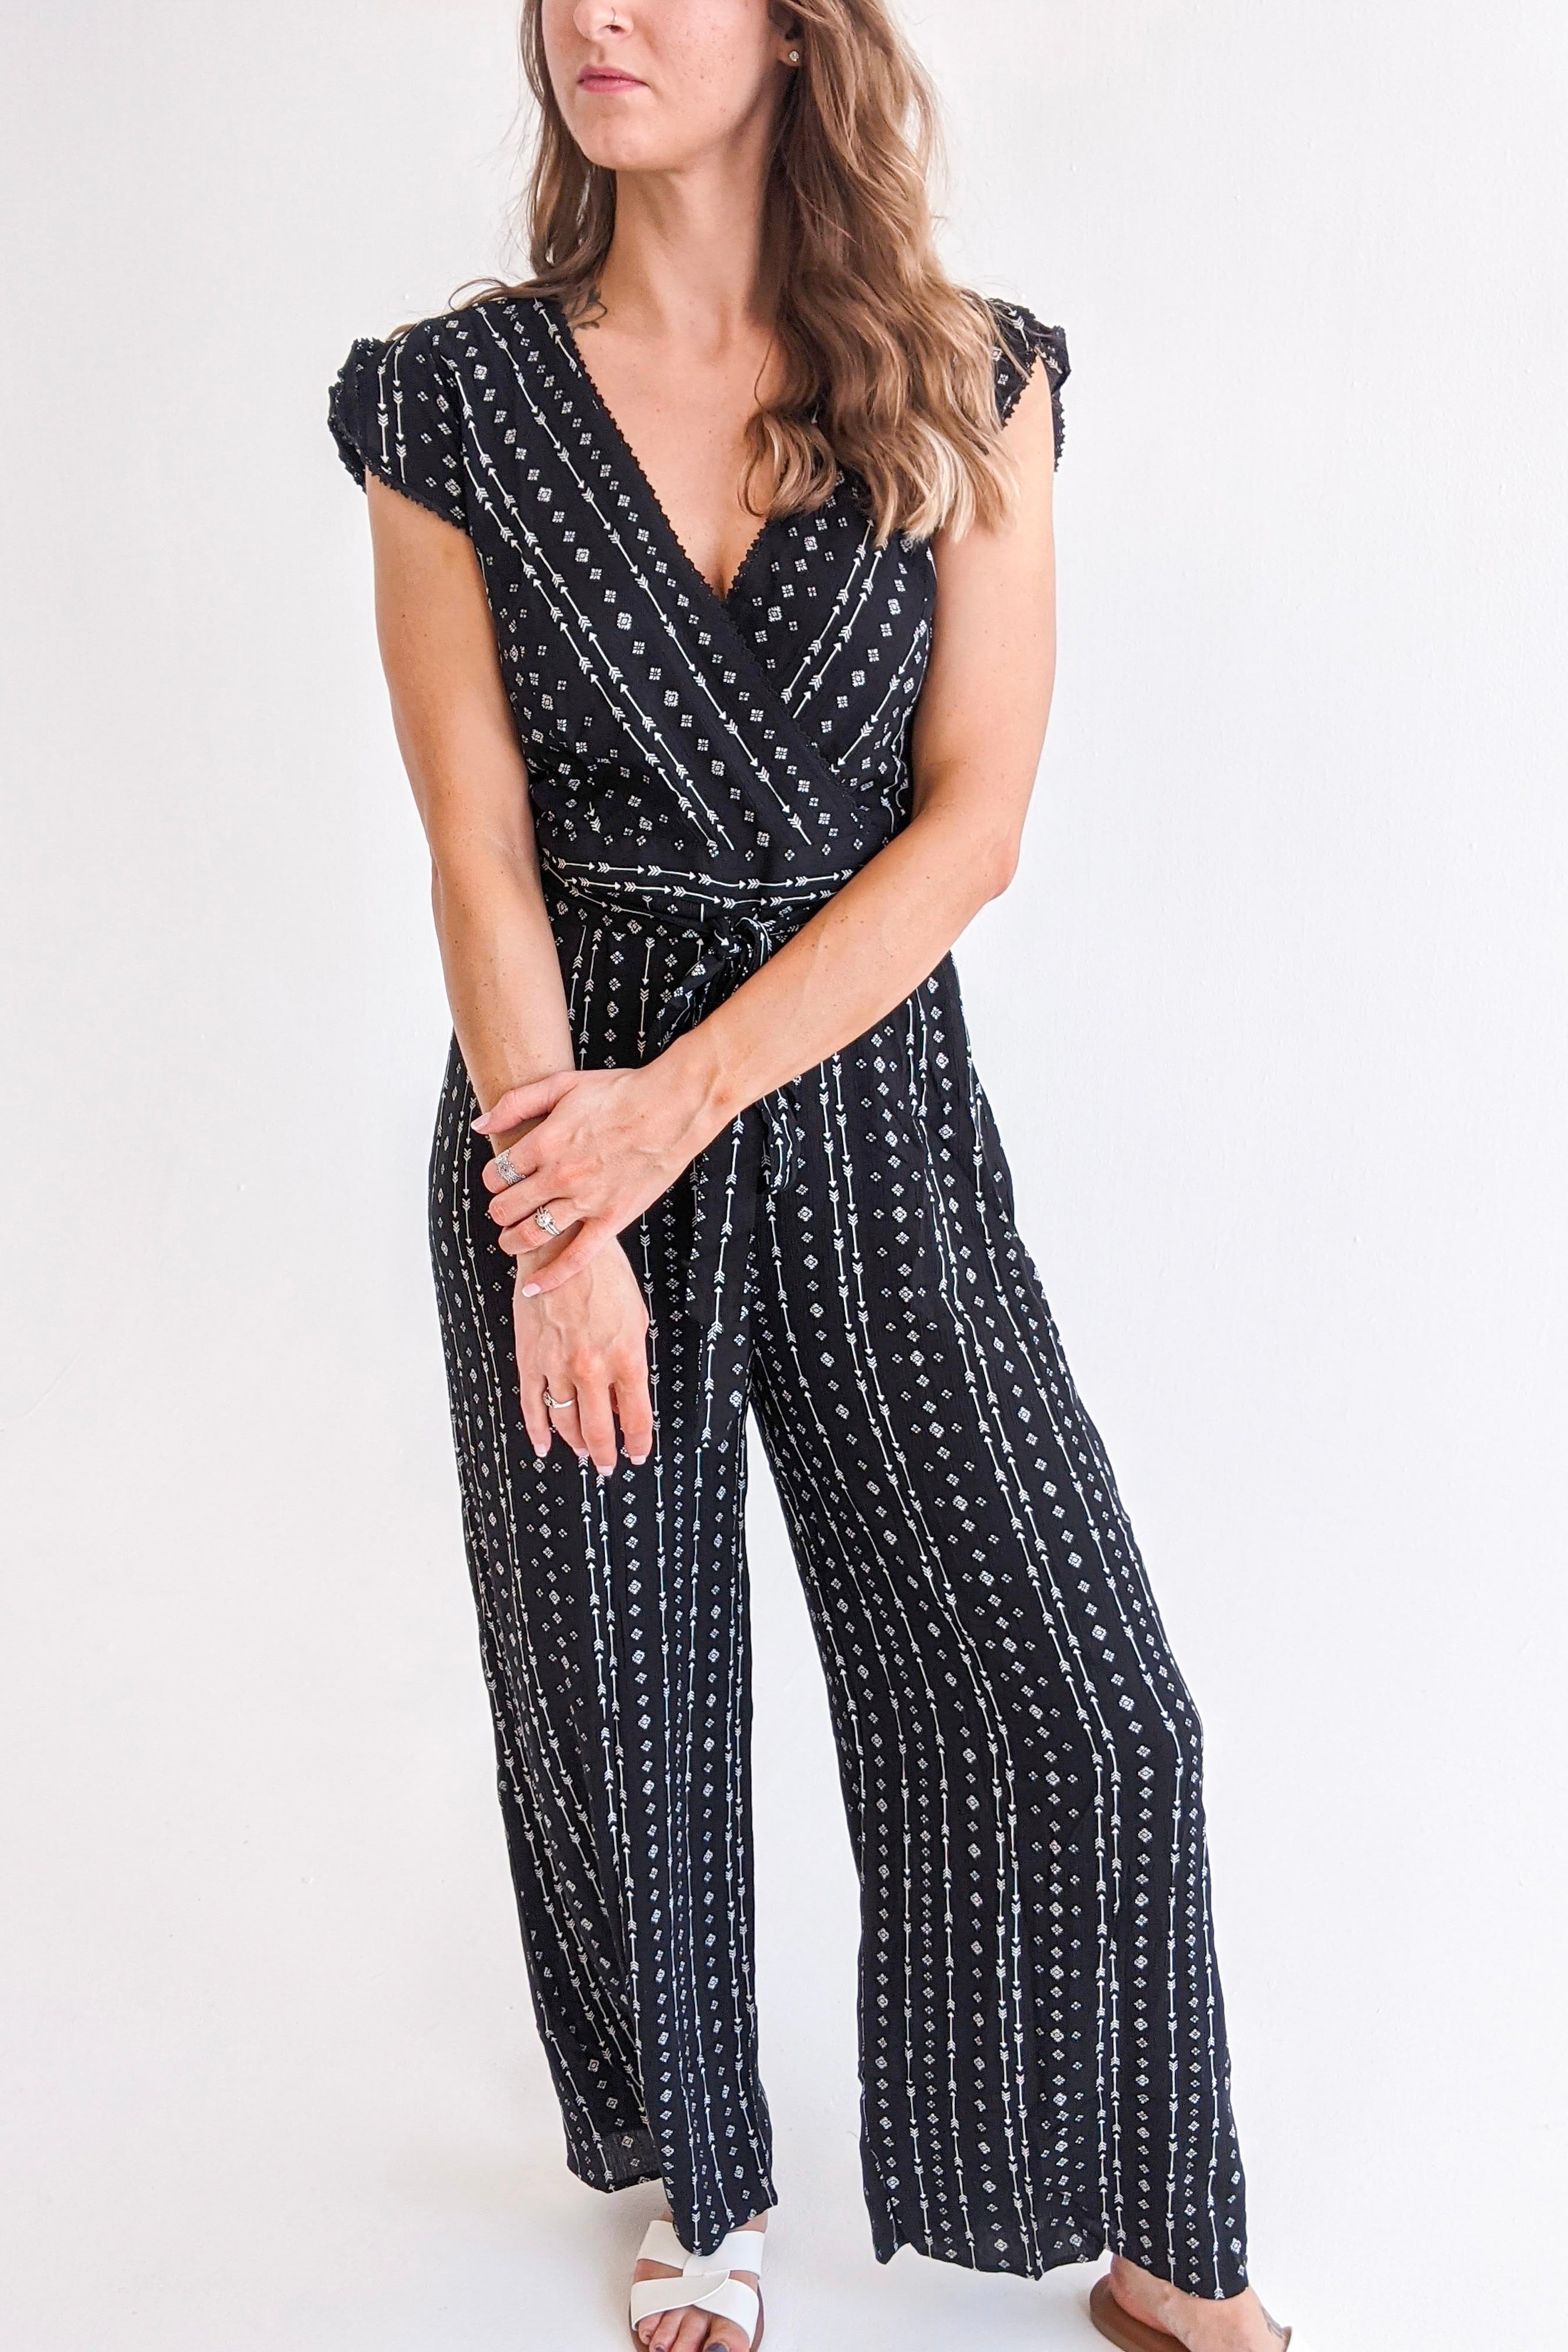 Circle Mall - Stay schick as always in #isibrownlagos business casual  Jumpsuit this friday #getitfromgv #greyvelvetstores #jointhecircle |  Facebook